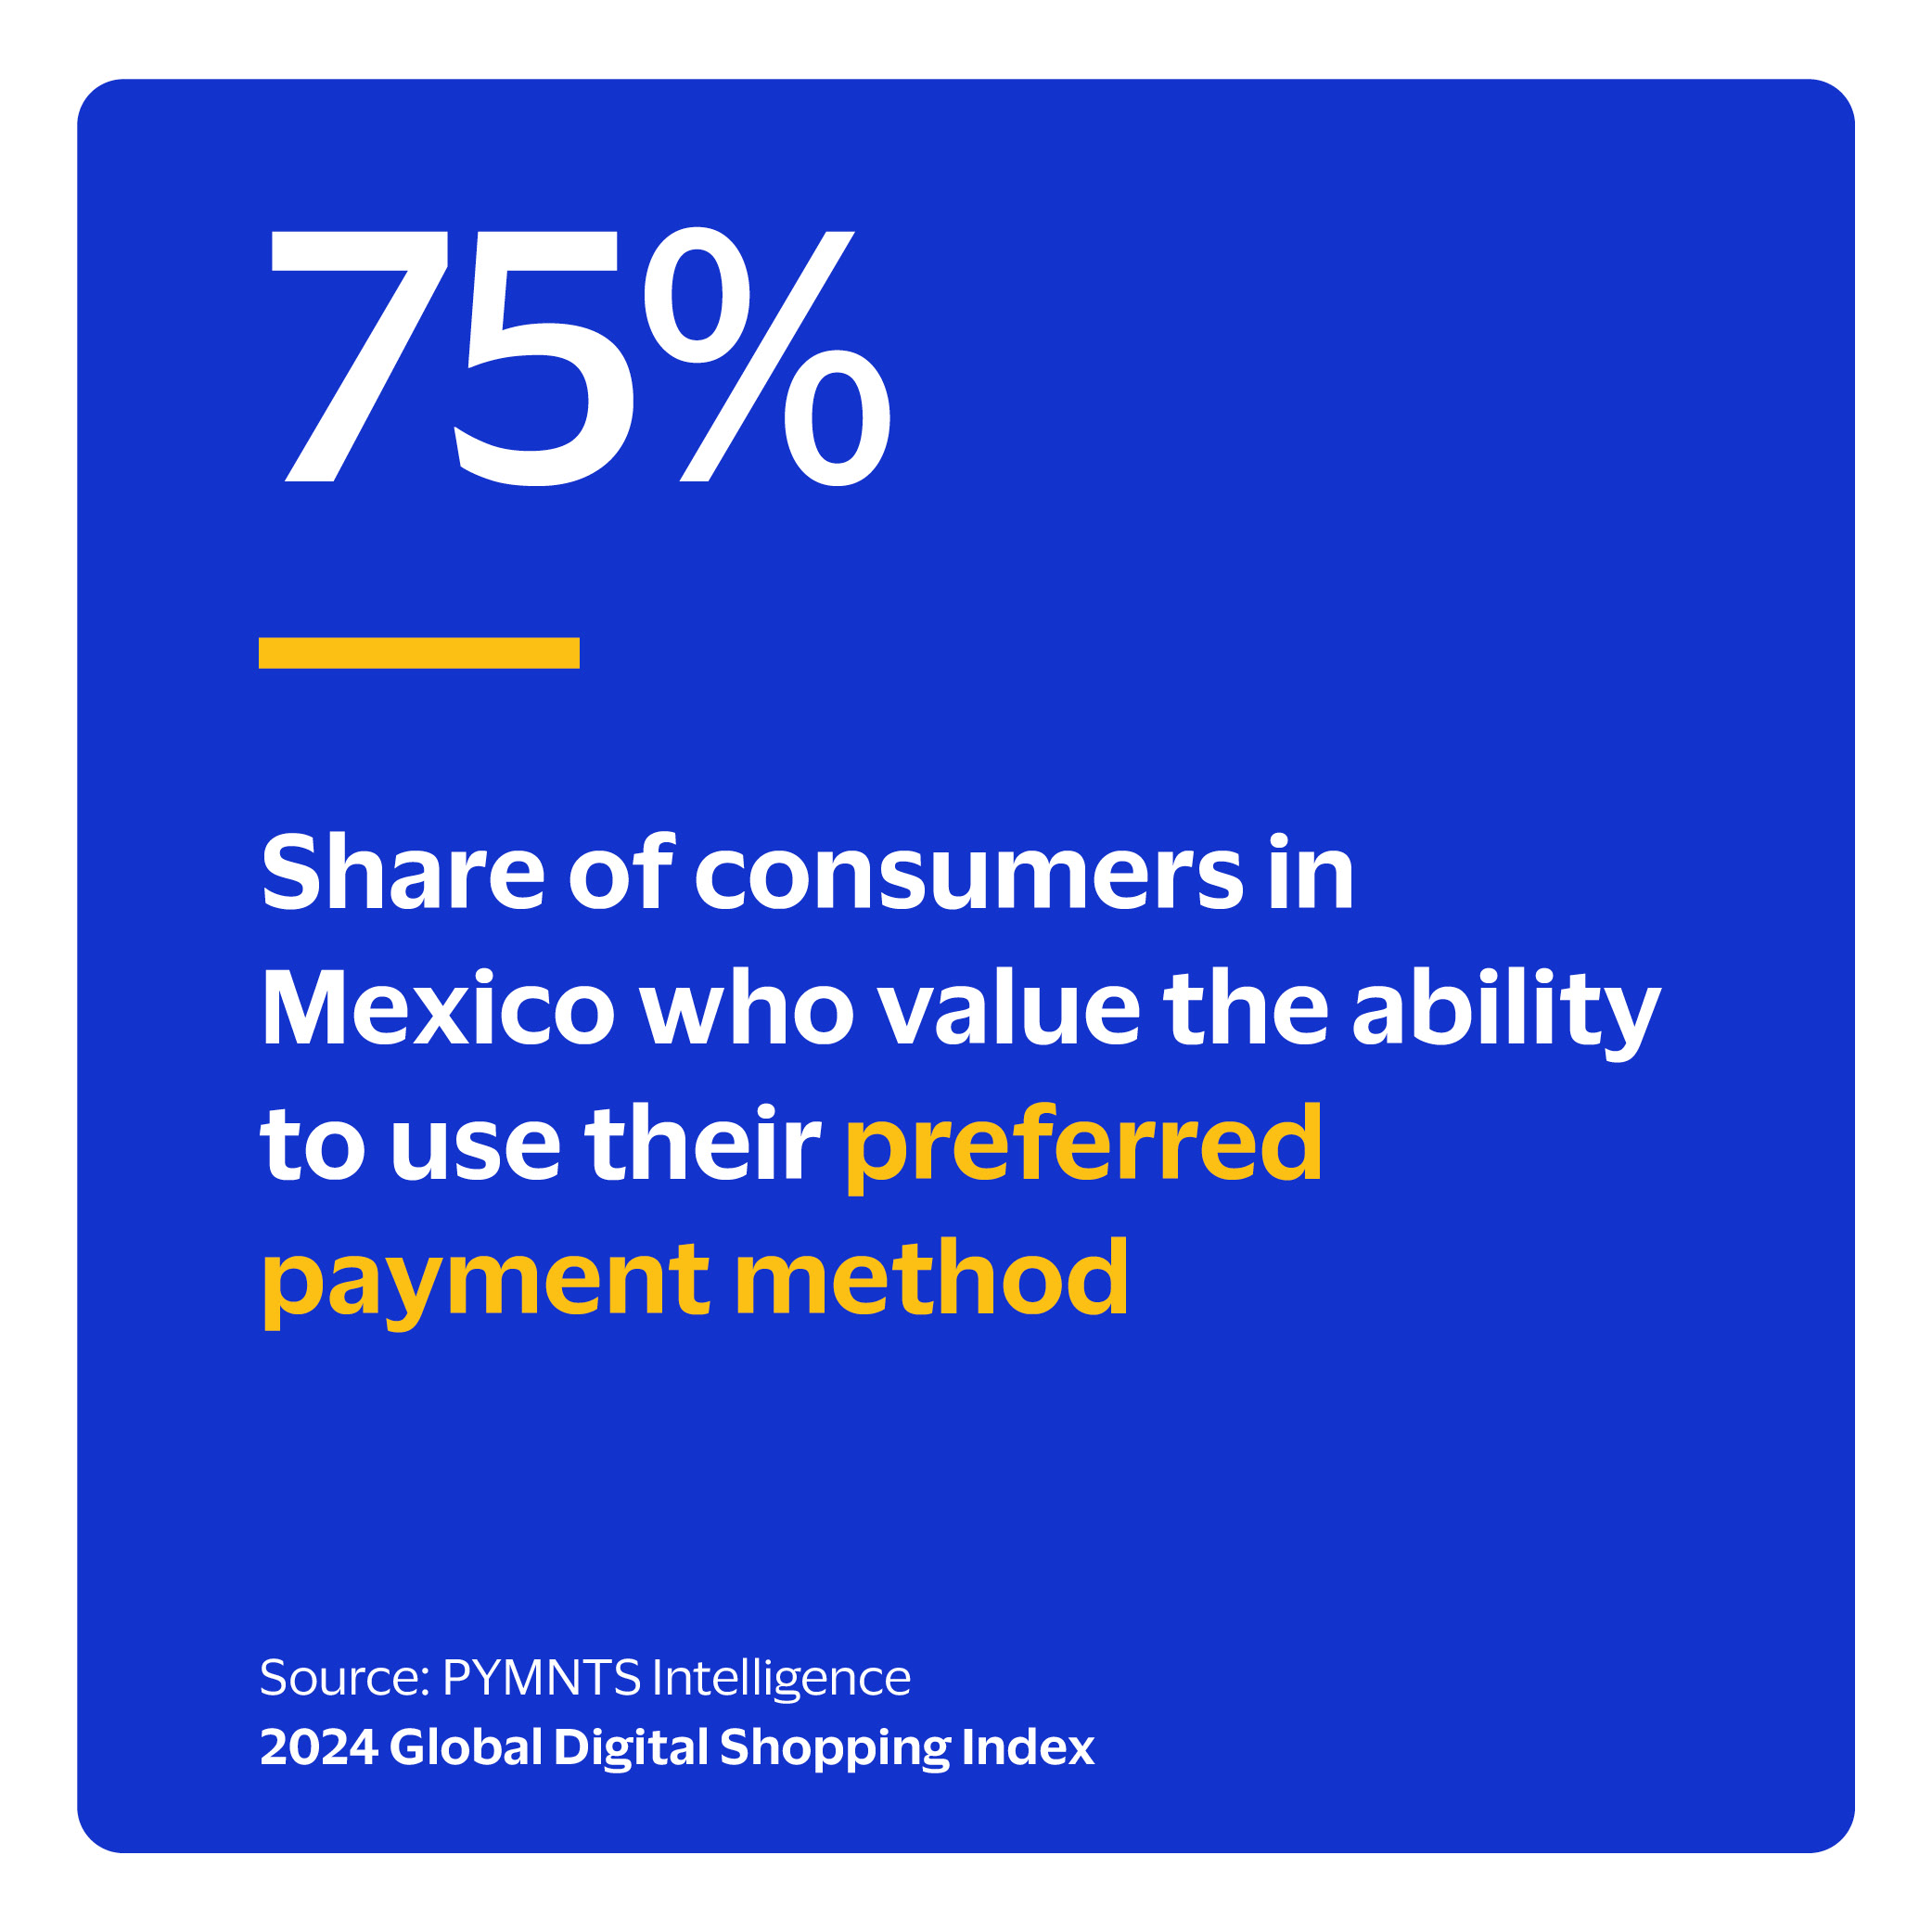 75%: Share of consumers in Mexico who value the ability to use their preferred payment method